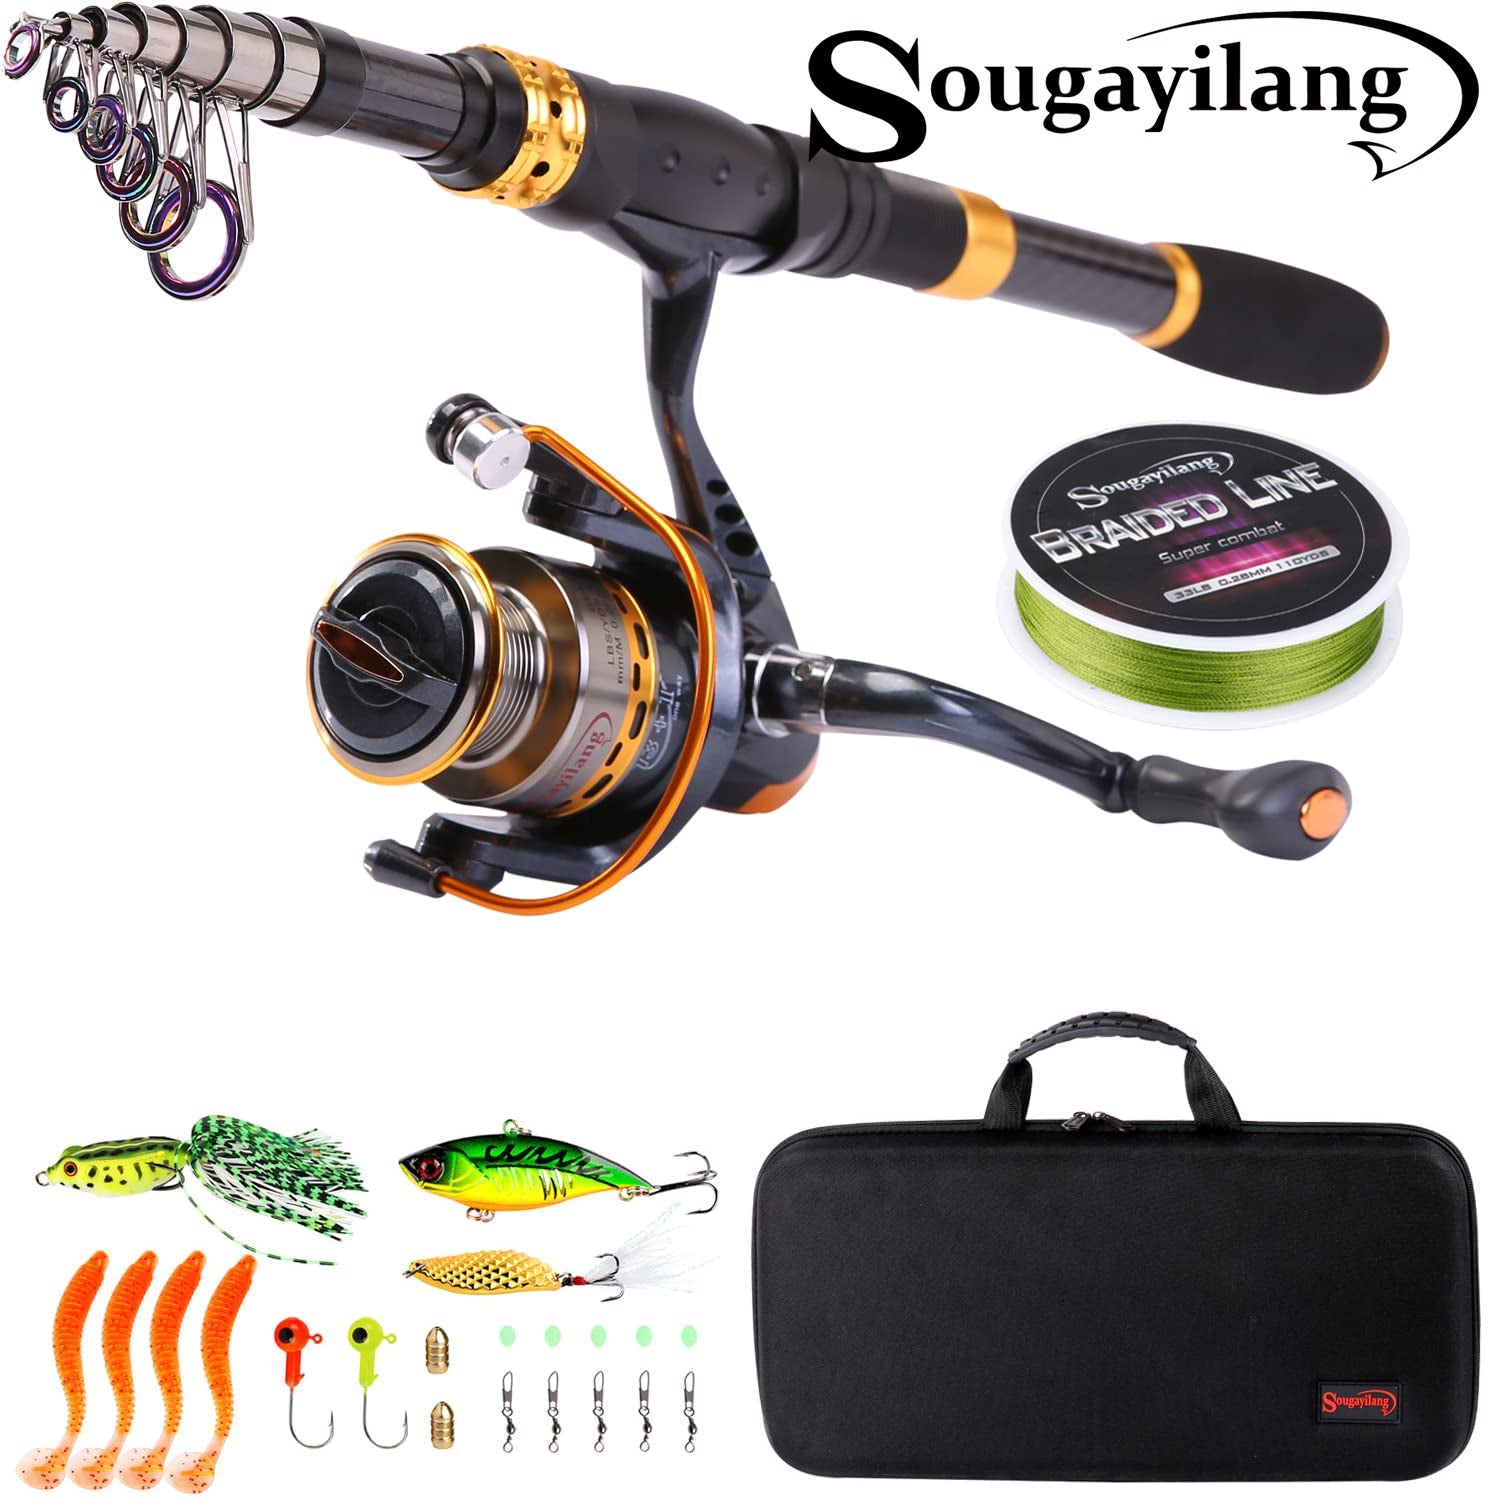 Sougayilang Telescopic Fishing Rod and Reel Combo, Ultralight Travel  Fishing Pole, Portable Collapsible Bass Crappie Rod, Inshore Stream Trout